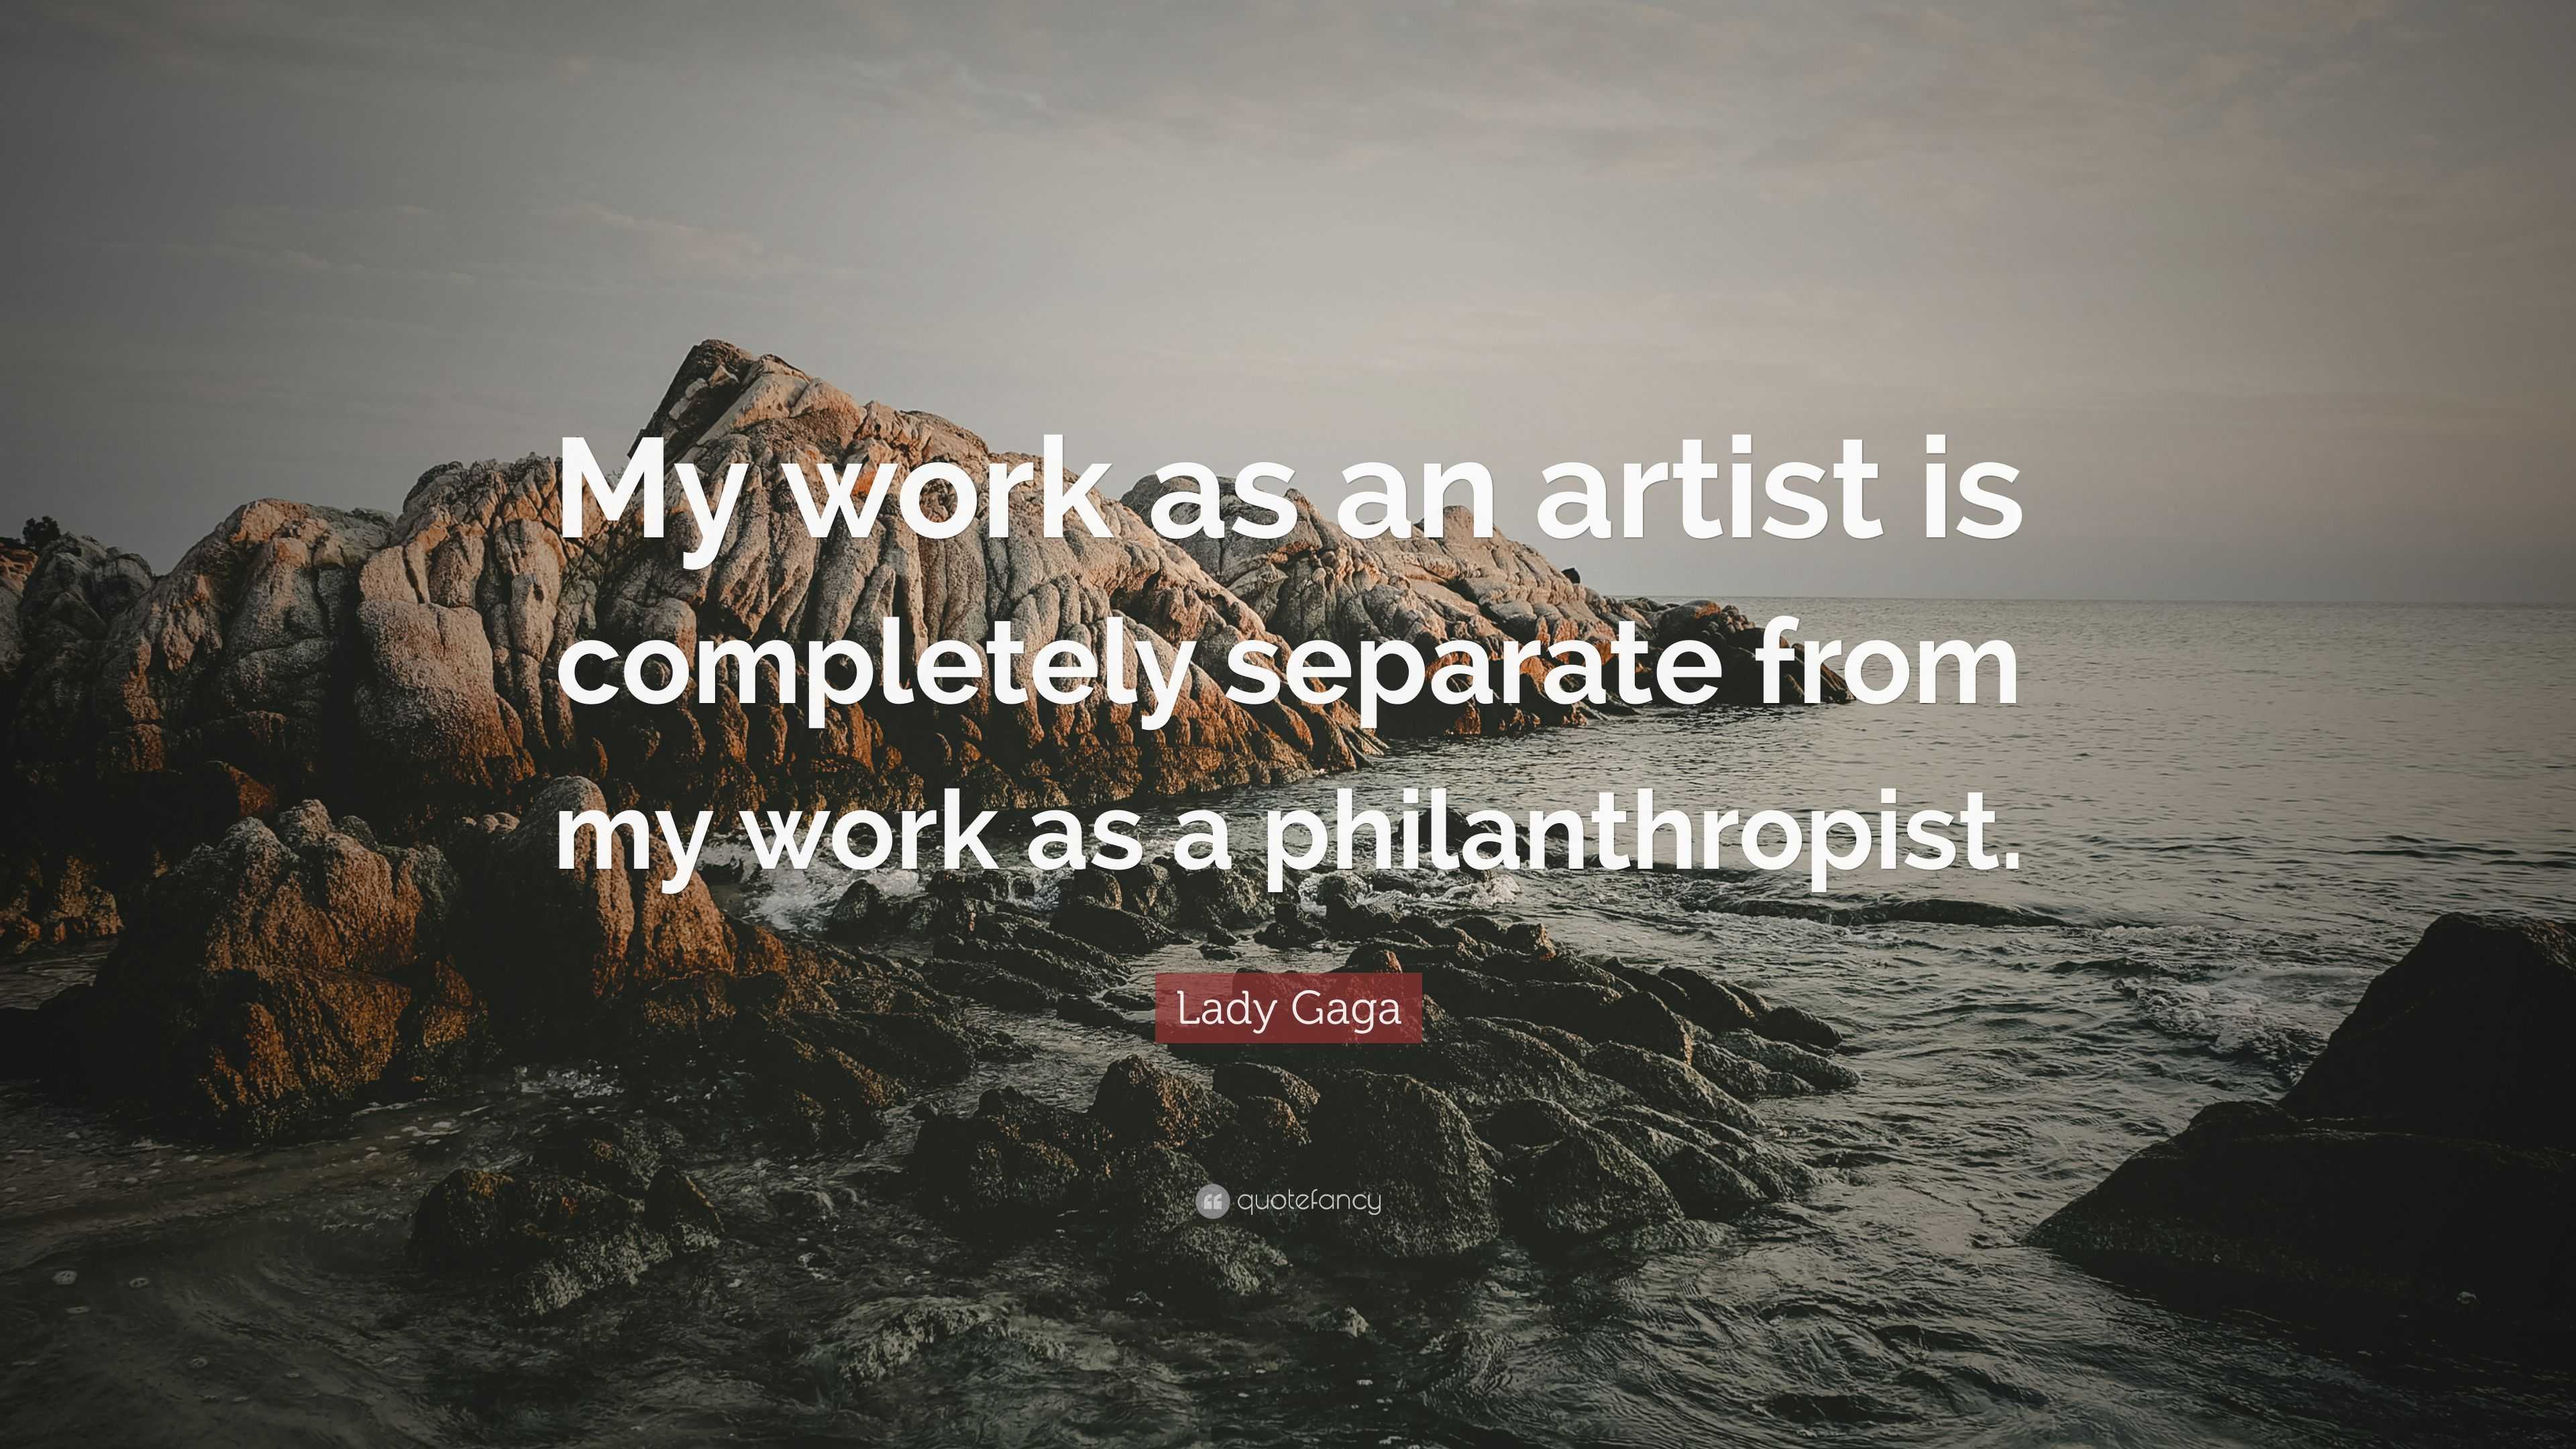 Lady Gaga Quote: “My work as an artist is completely separate from my